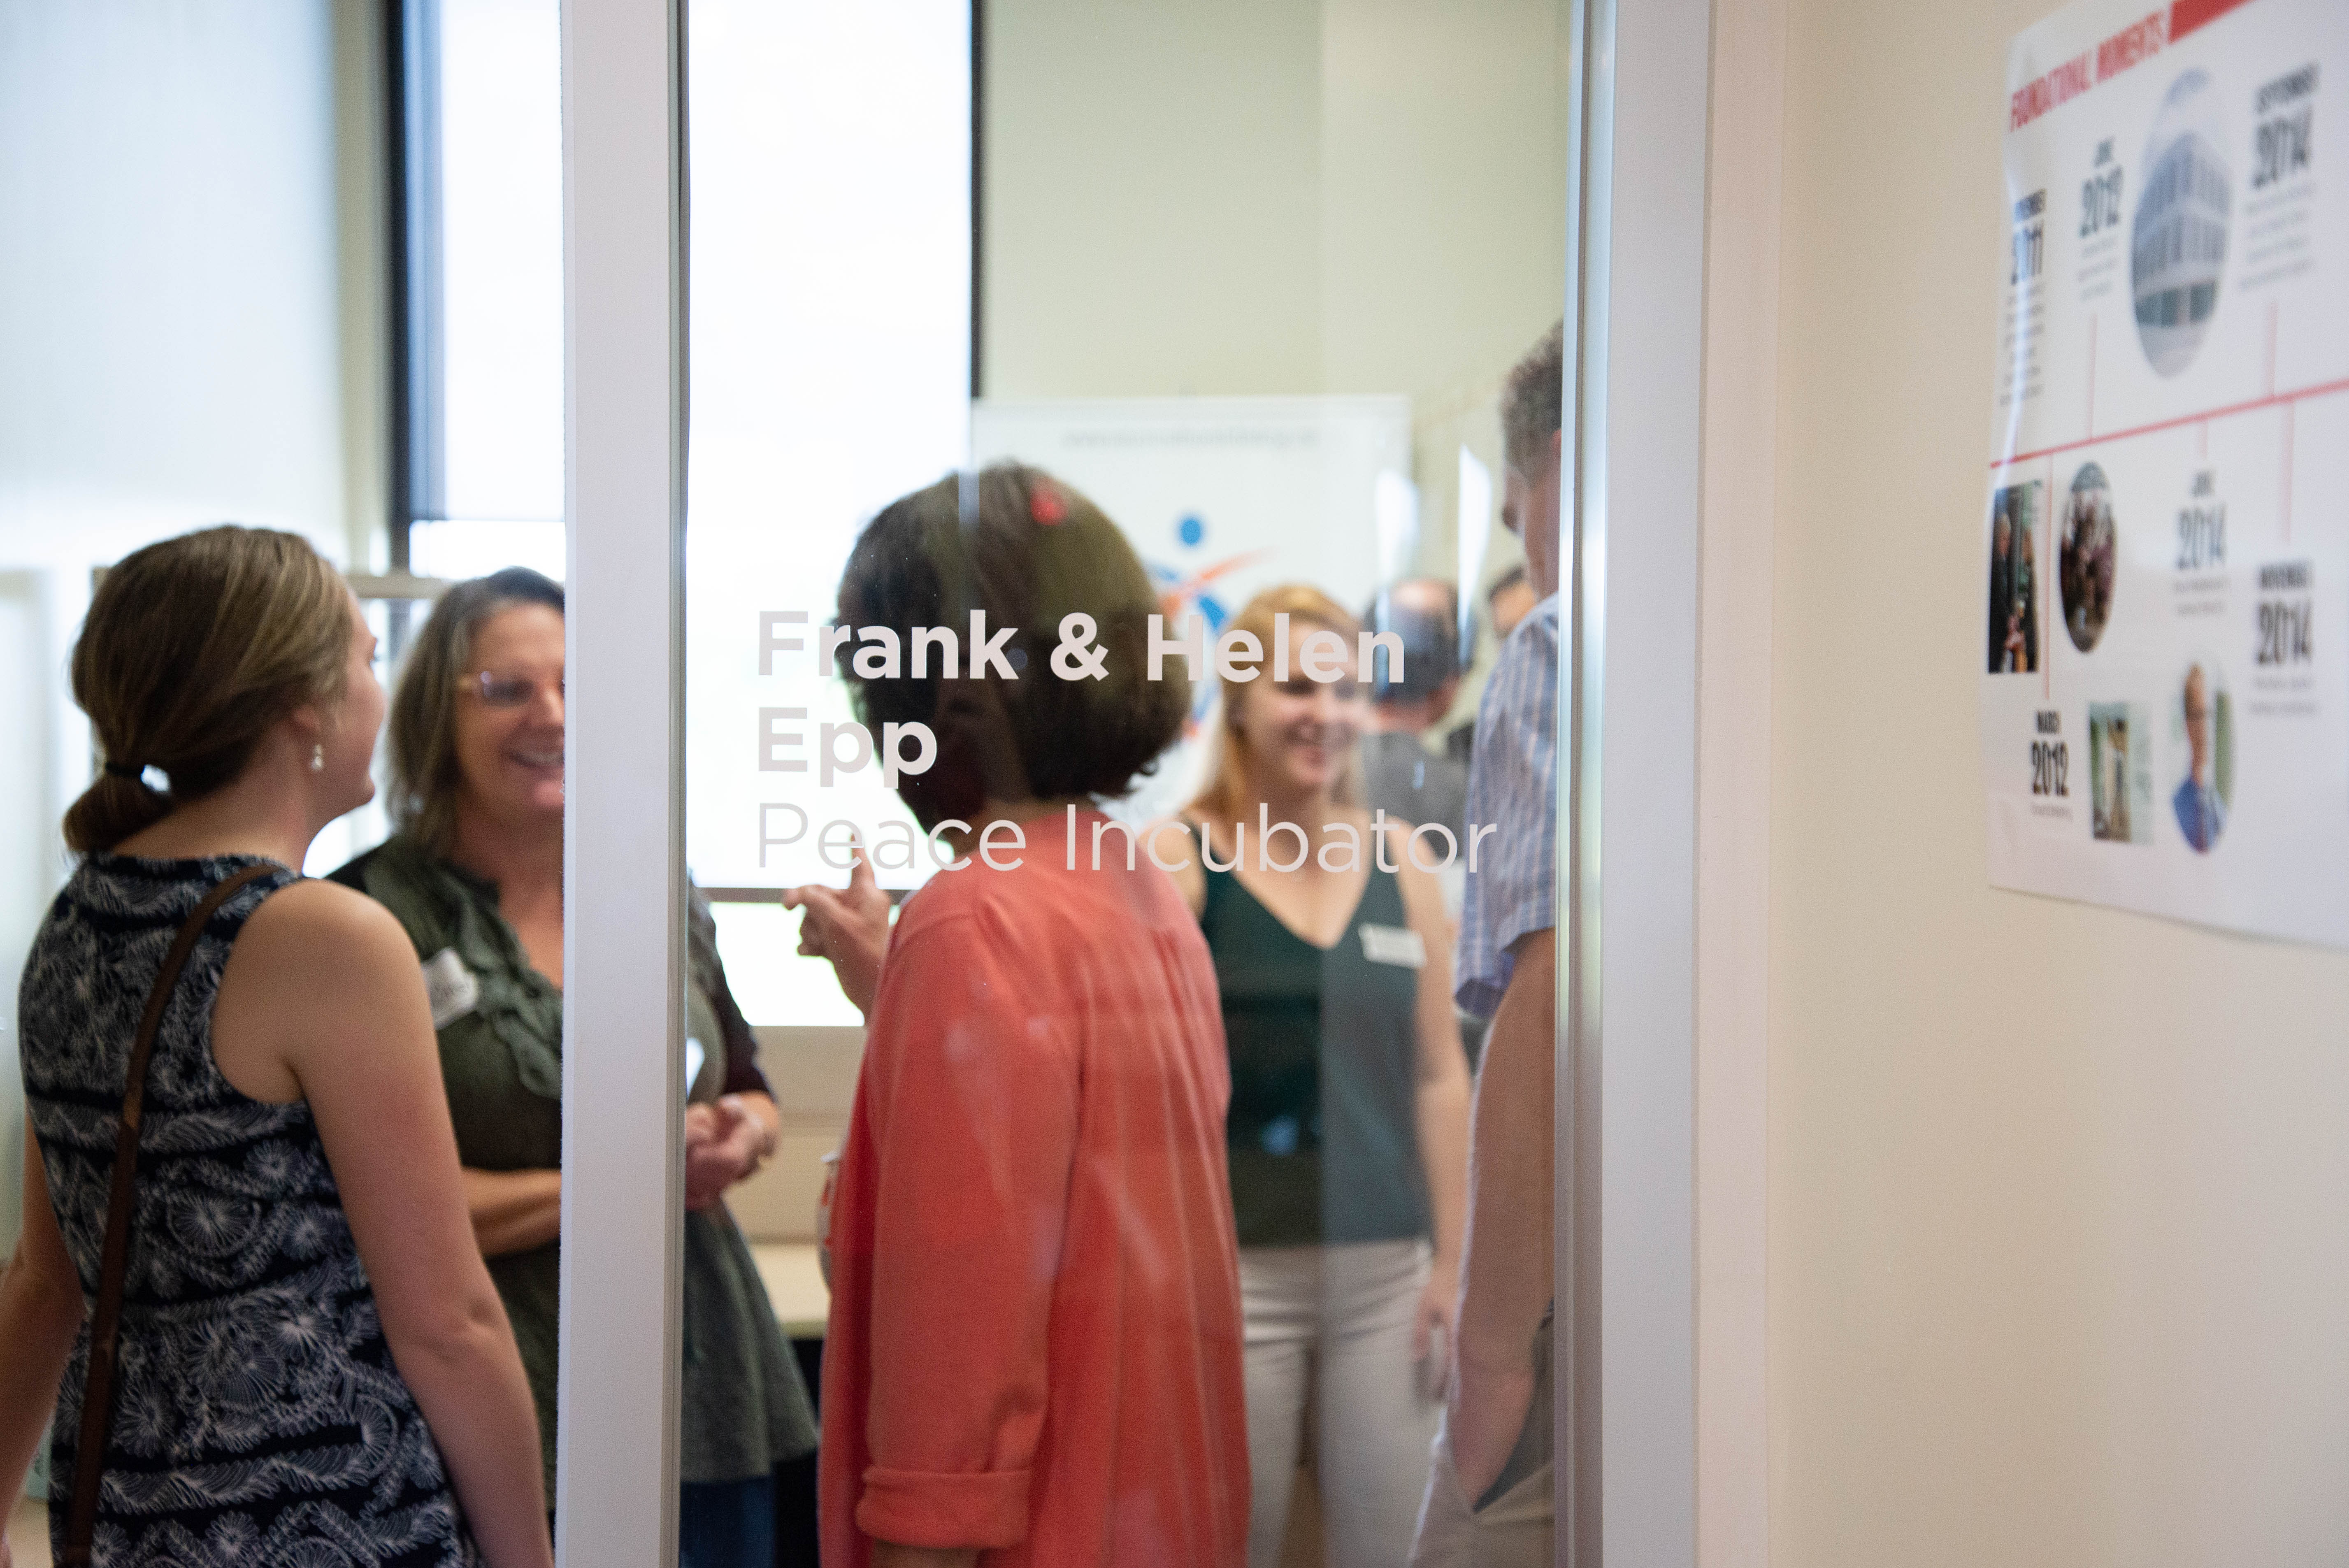 A group of people standing on the other side of the glass wall of the Frank and Helen Epp Peace Incubator